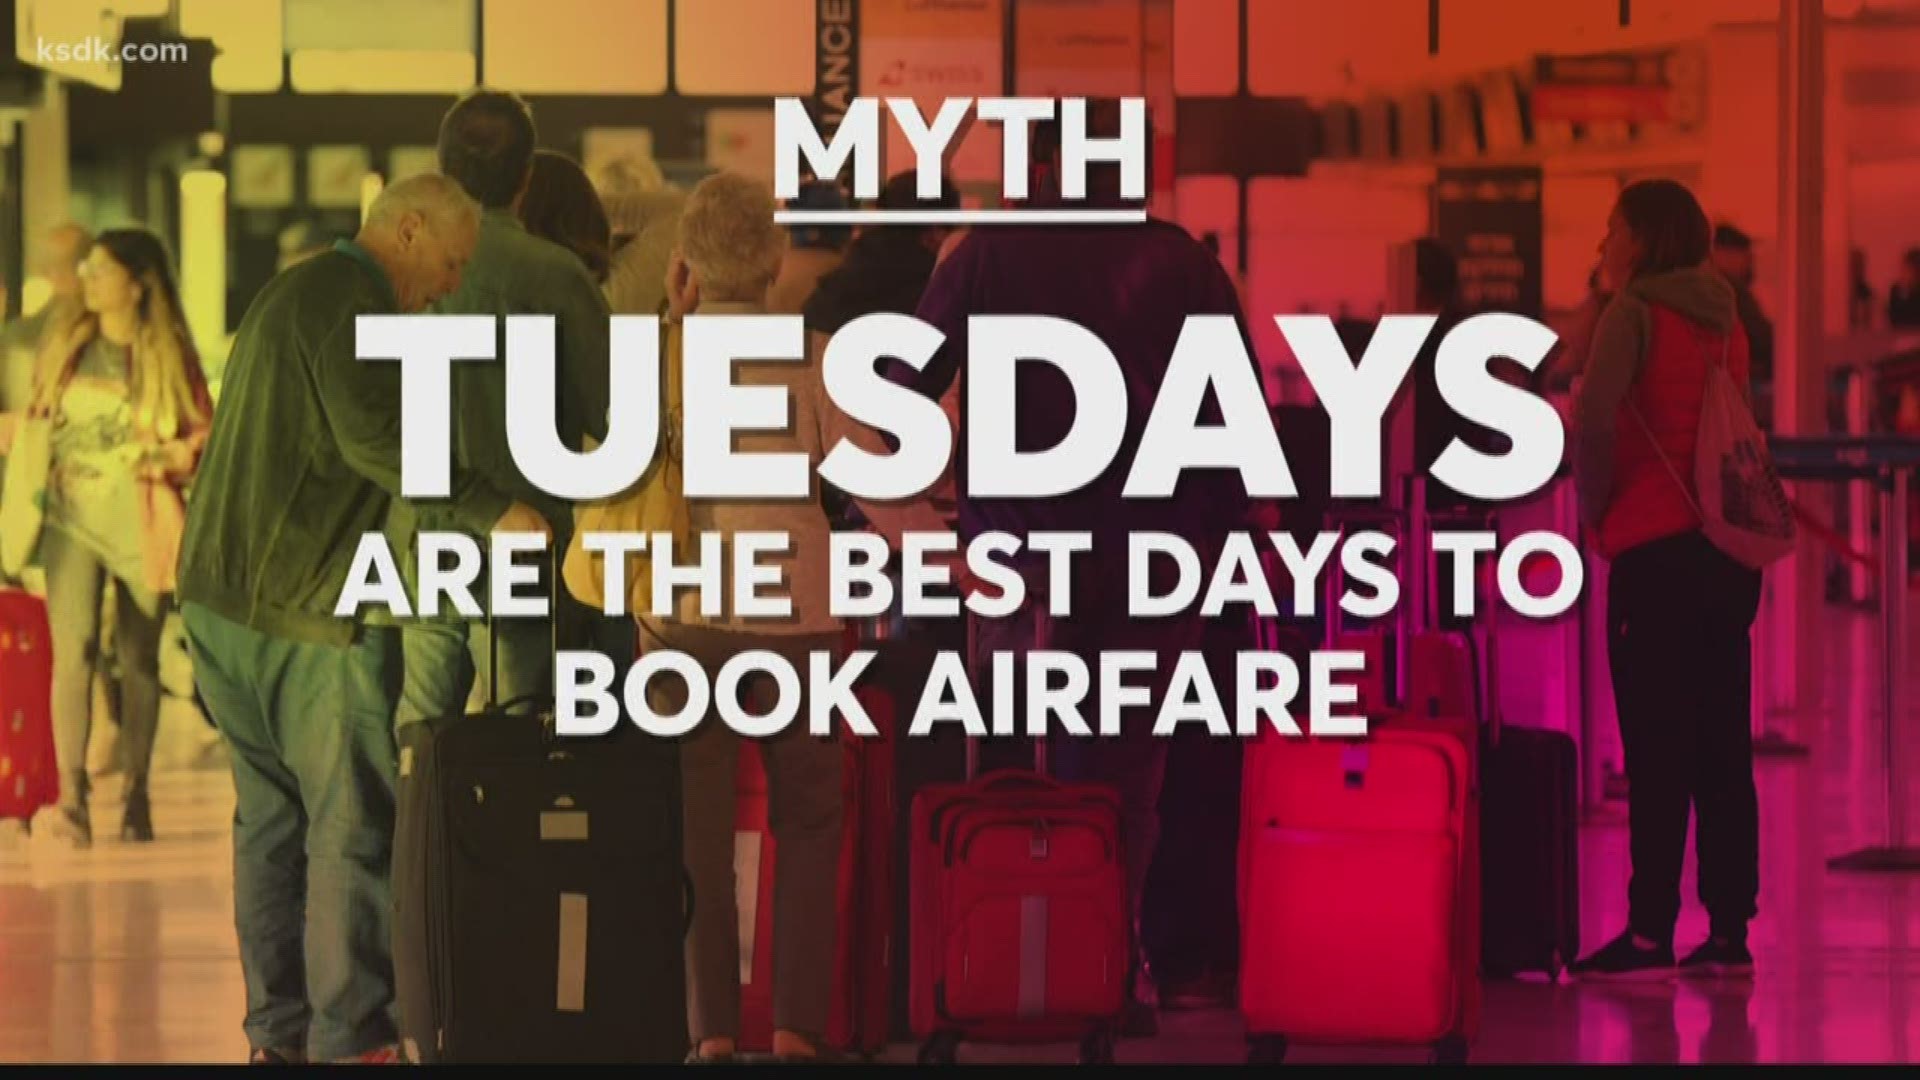 Consumer Reports dispels airfare myths, such as the best day of the week to buy an airline ticket, which could be costing travelers money.